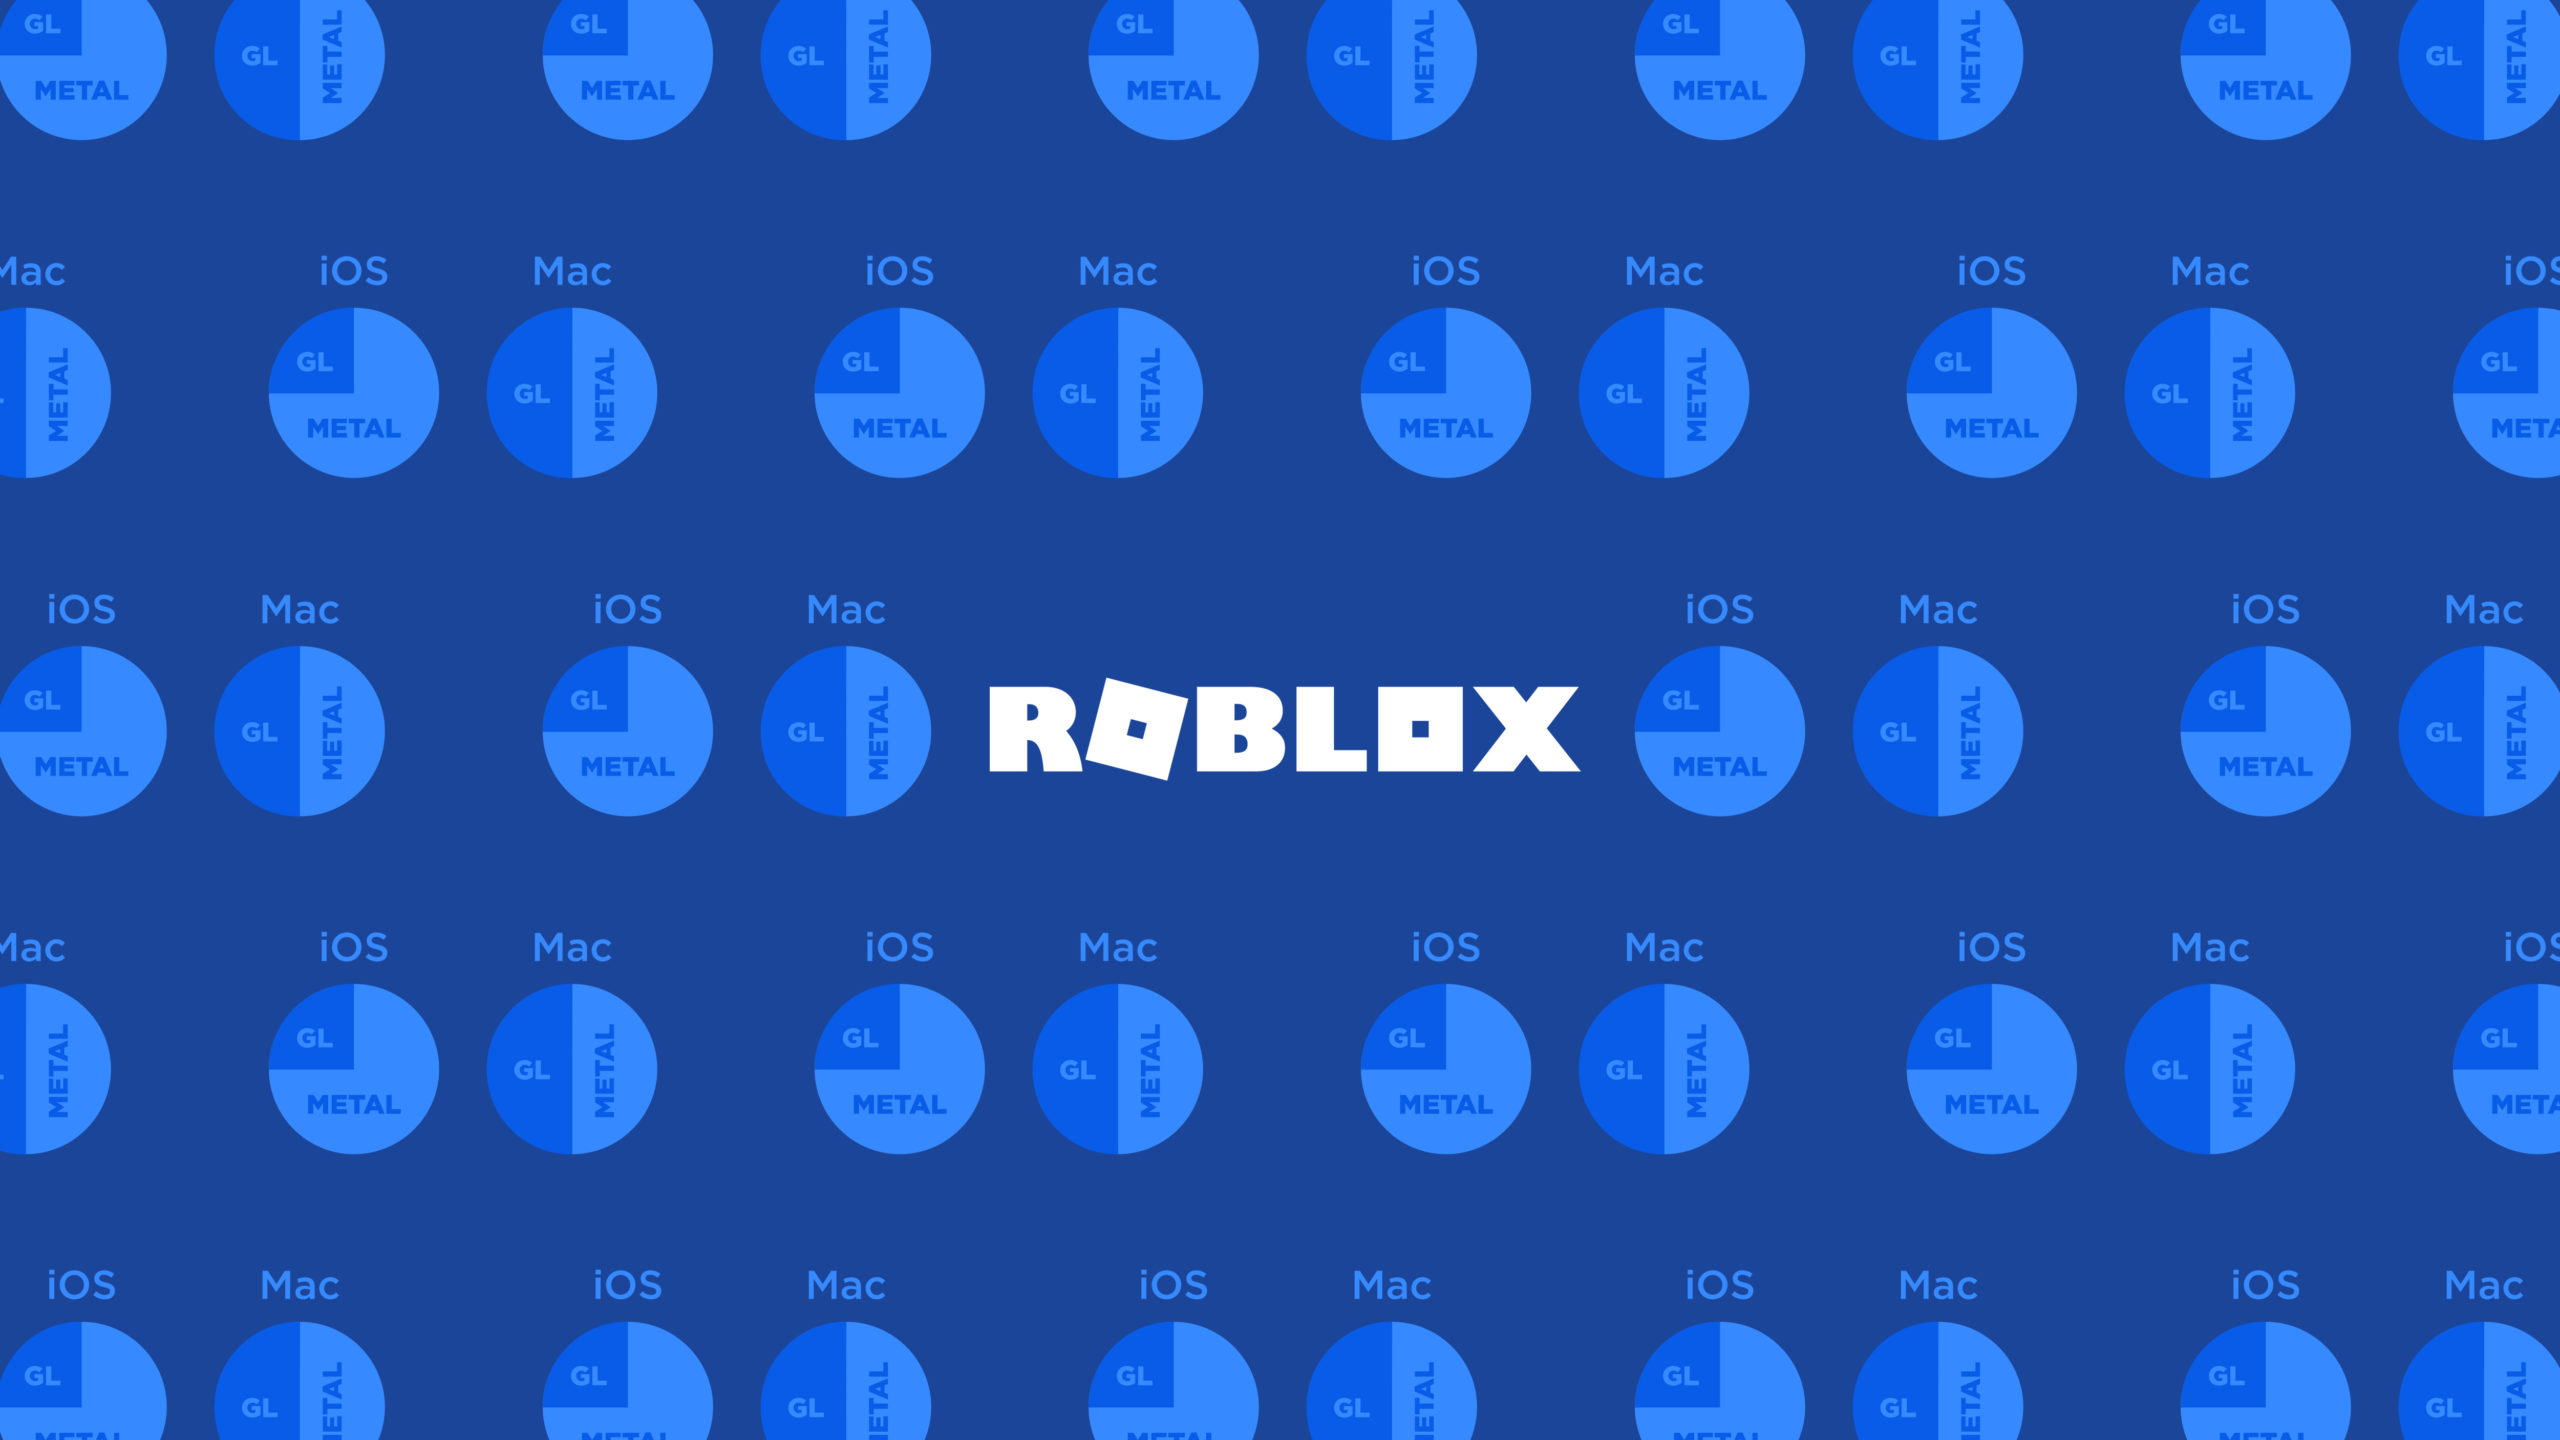 How To Install Roblox On A Macbook Air